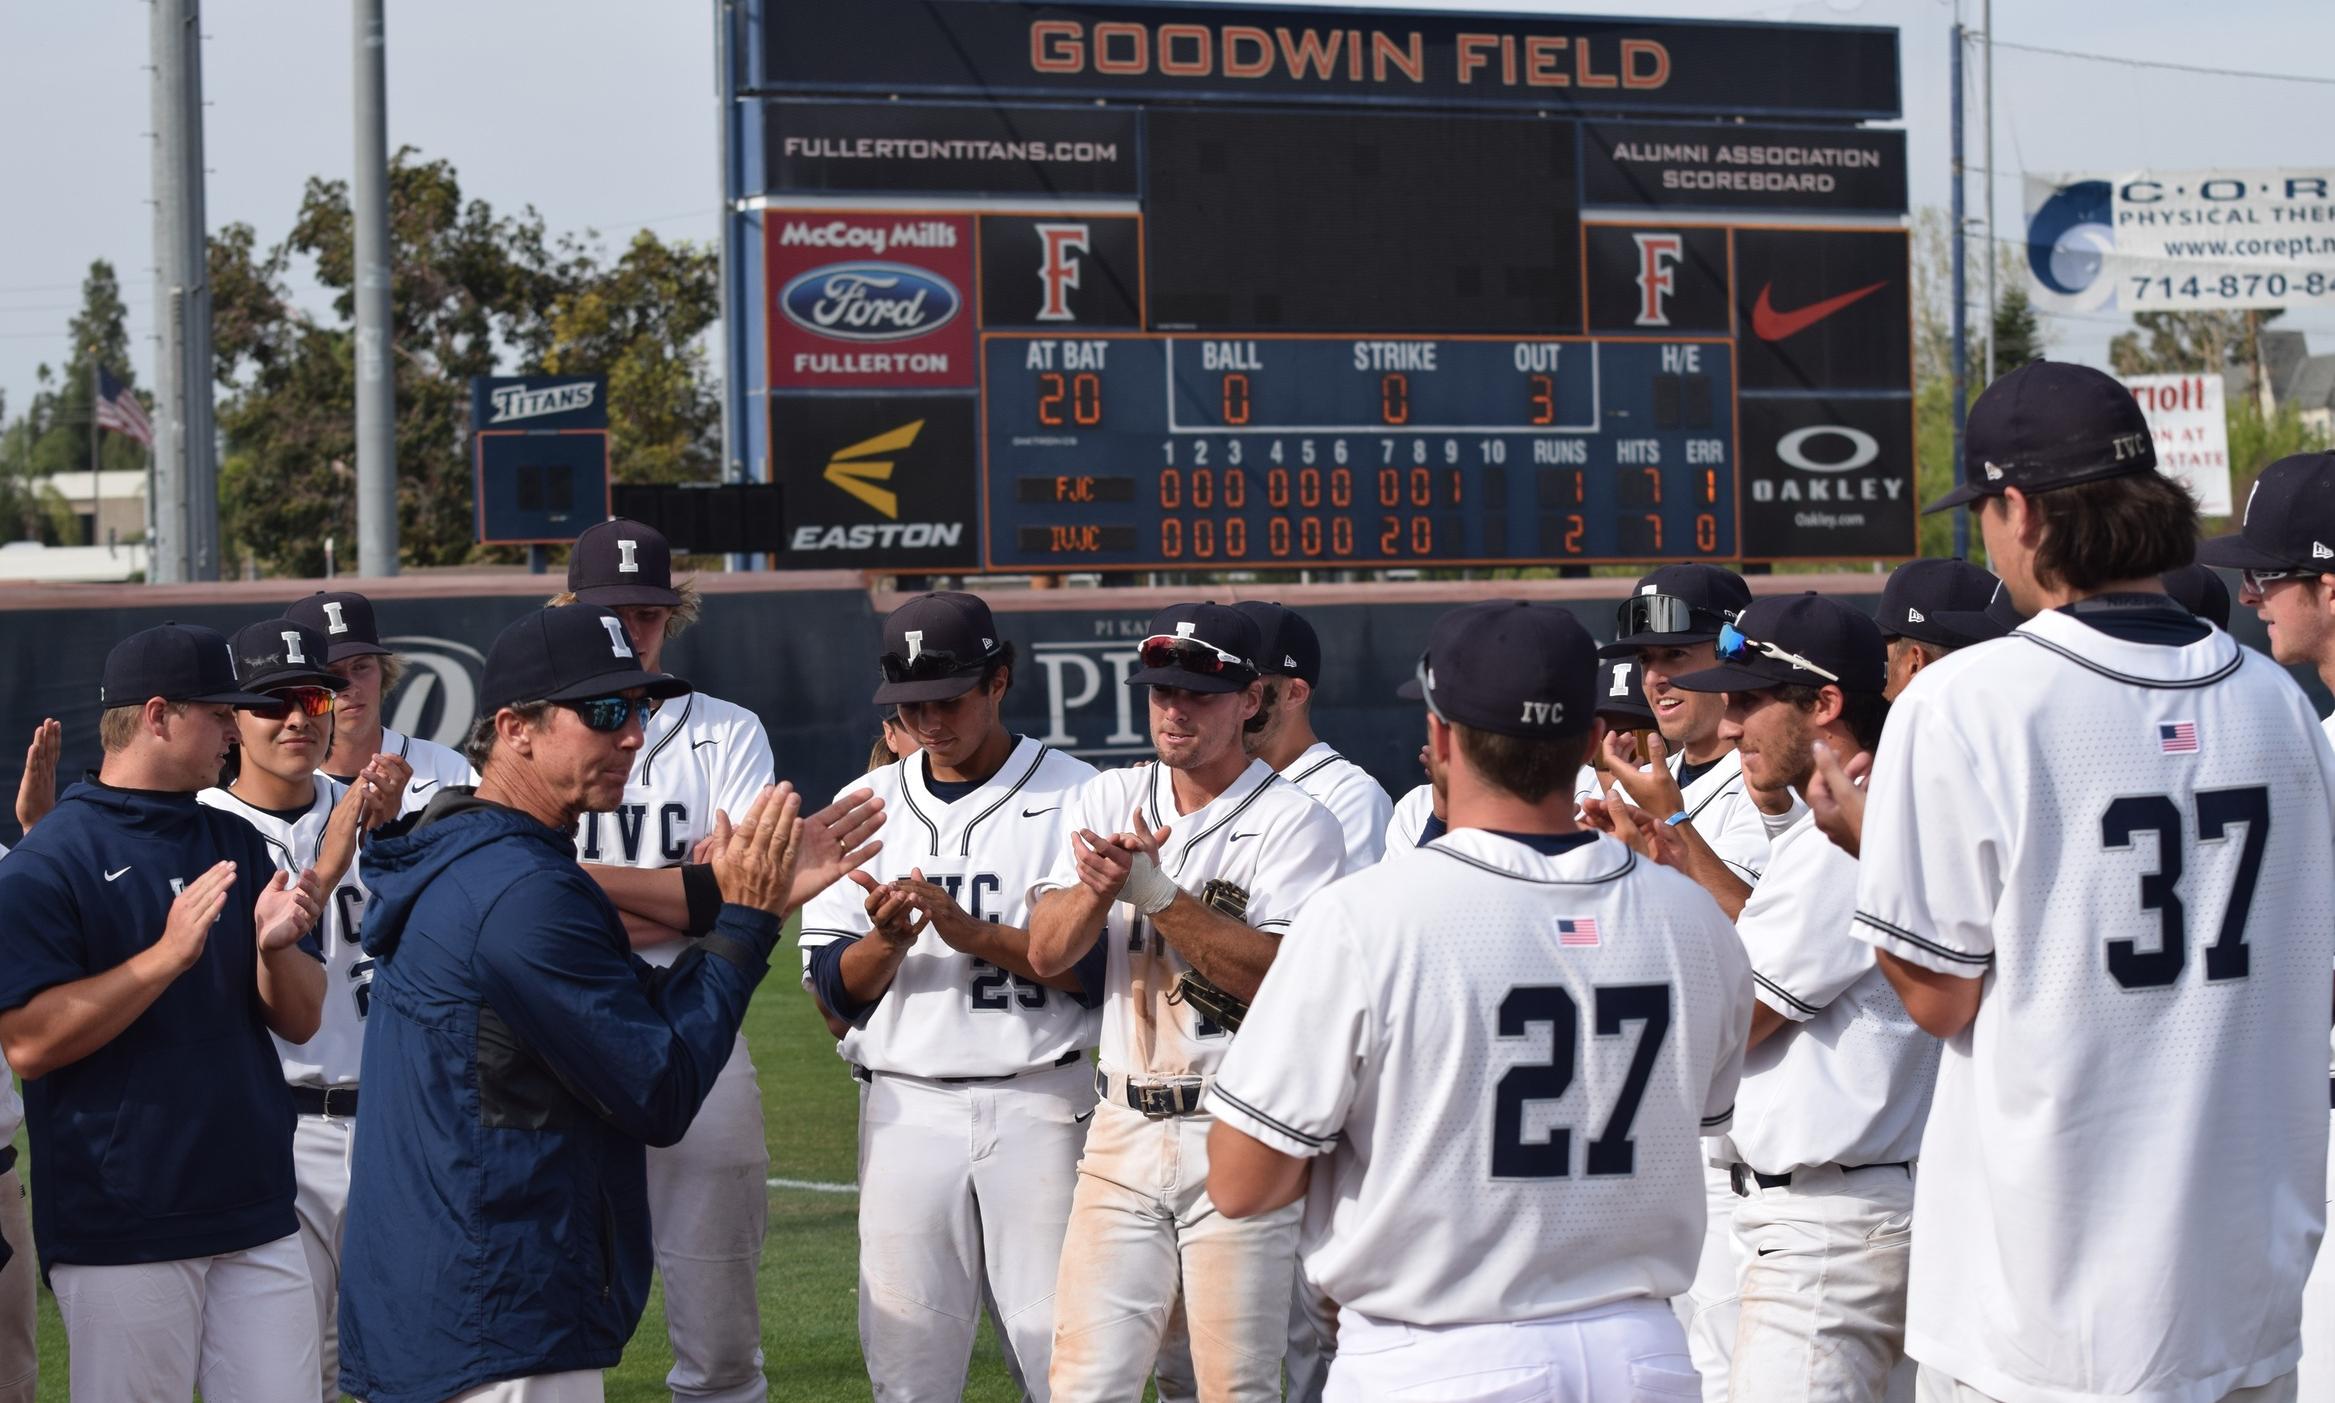 Baseball team starts series with 2-1 win over Fullerton at CSUF